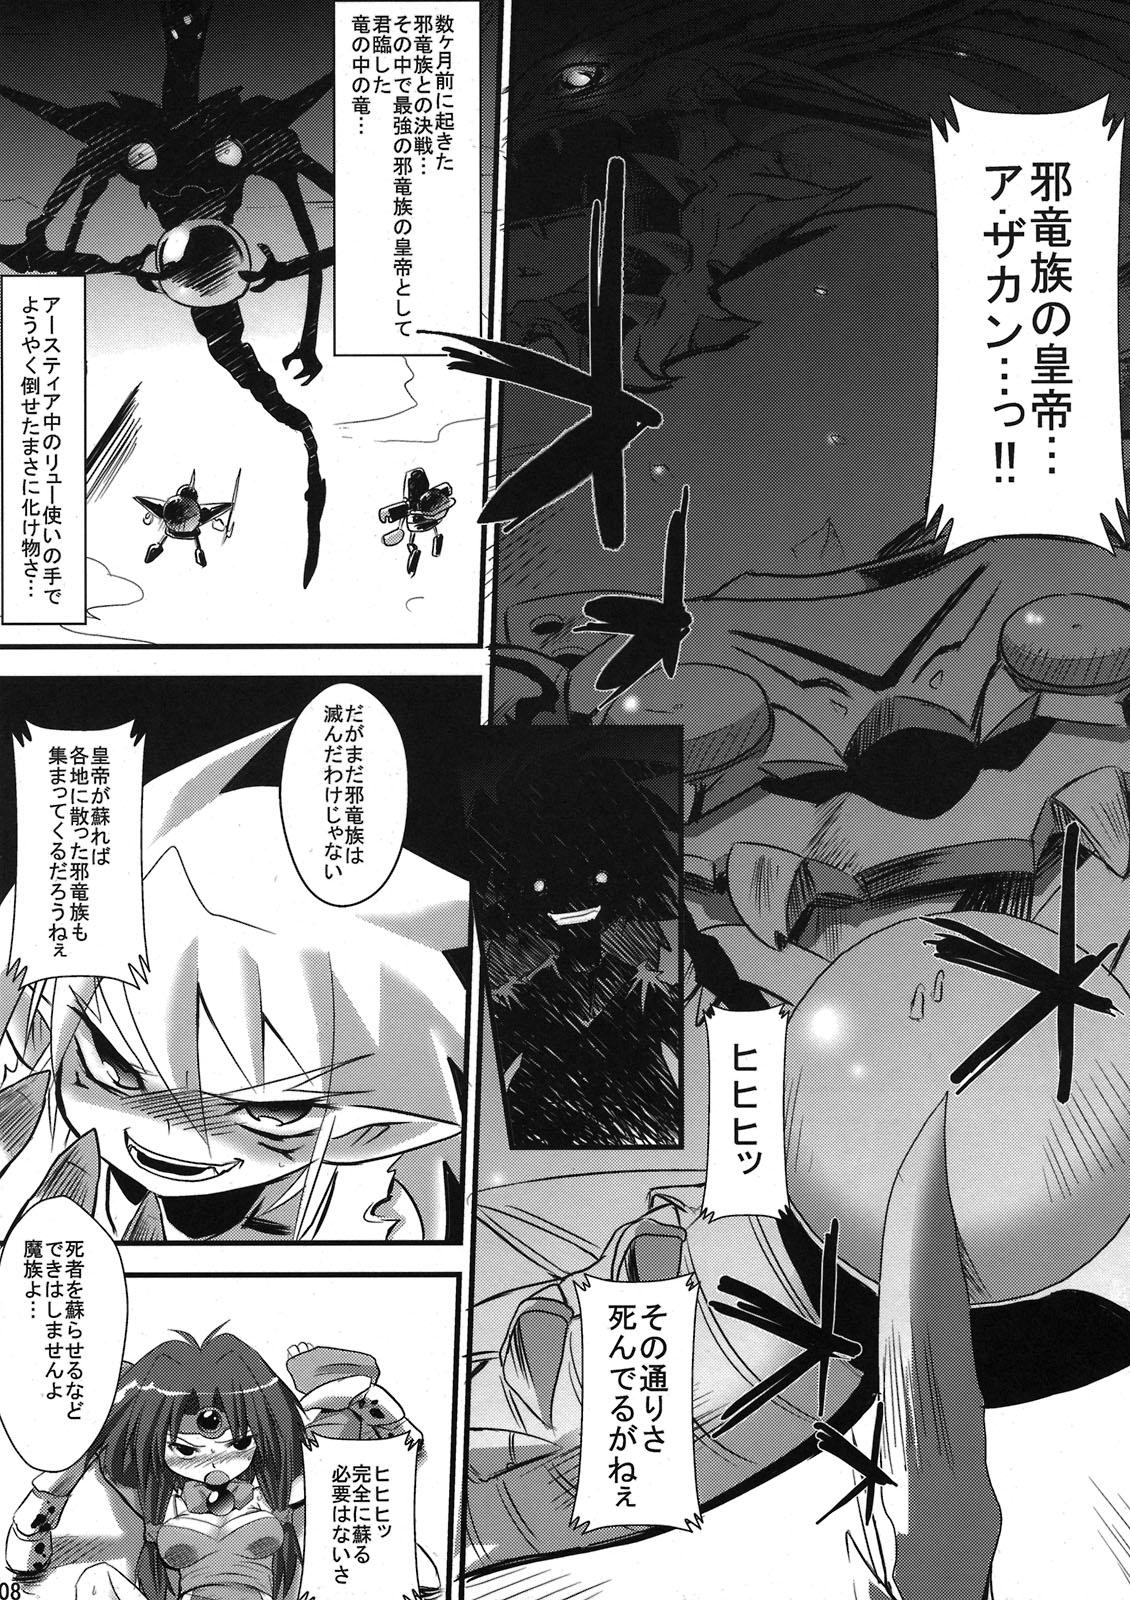 Vibrator Toraware no Madouhime Joukan - Lord of lords ryu knight Teenporn - Page 8